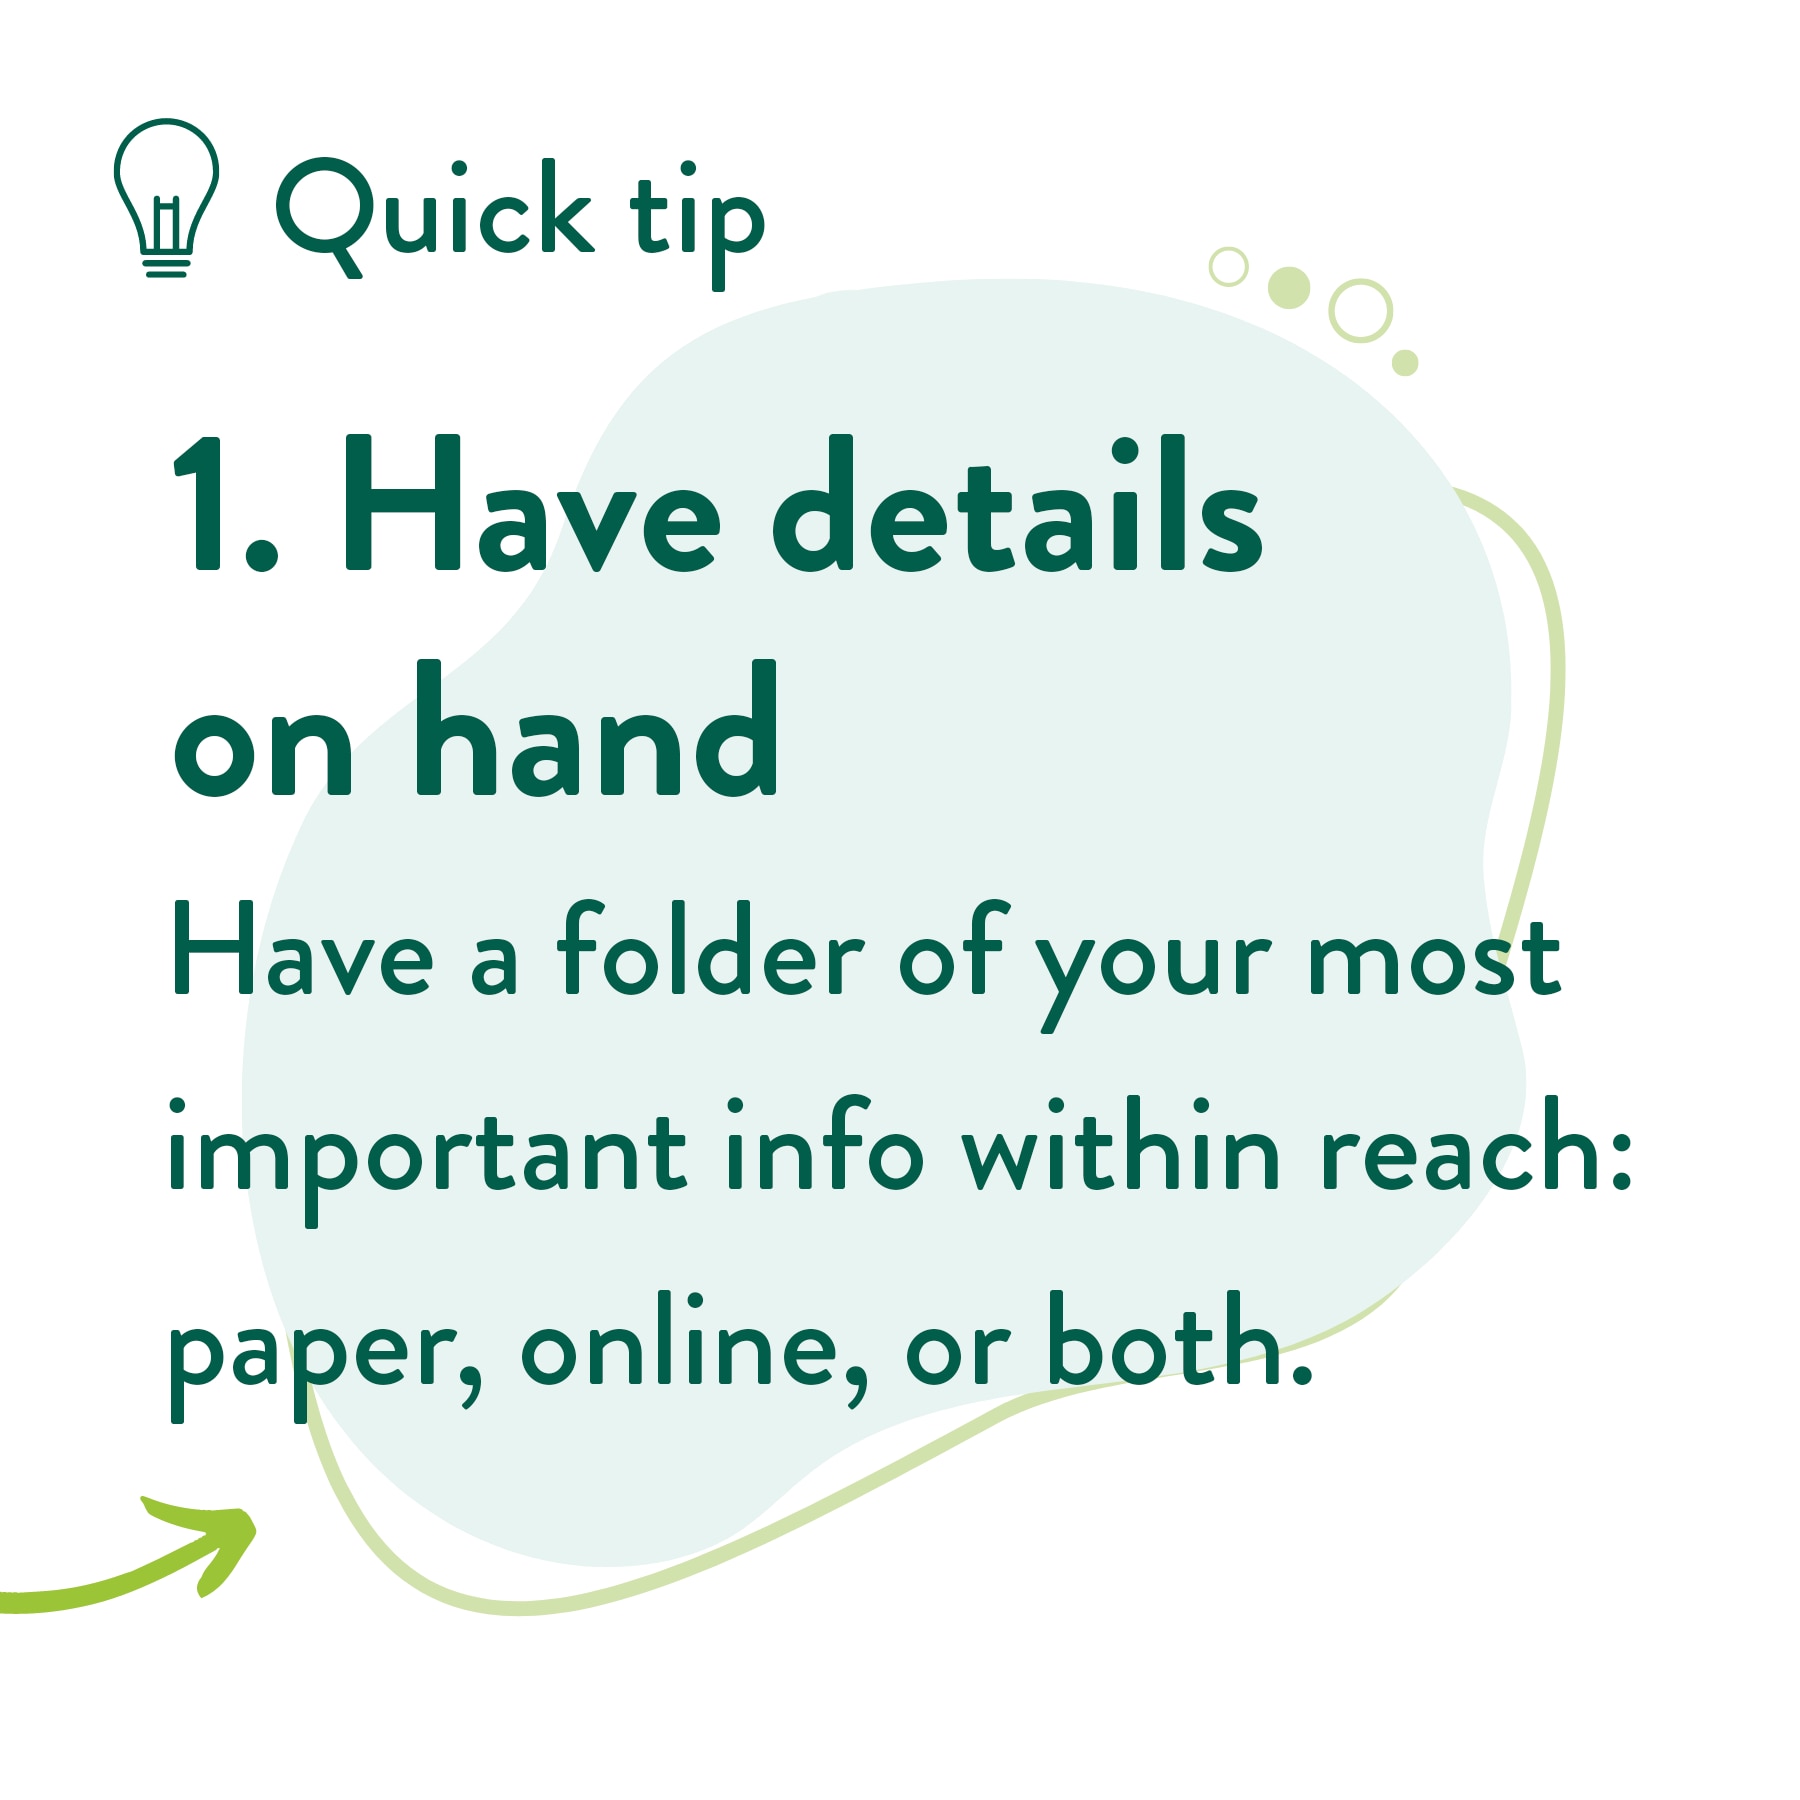 Have a folder of your most important info within reach: paper, online, or both.